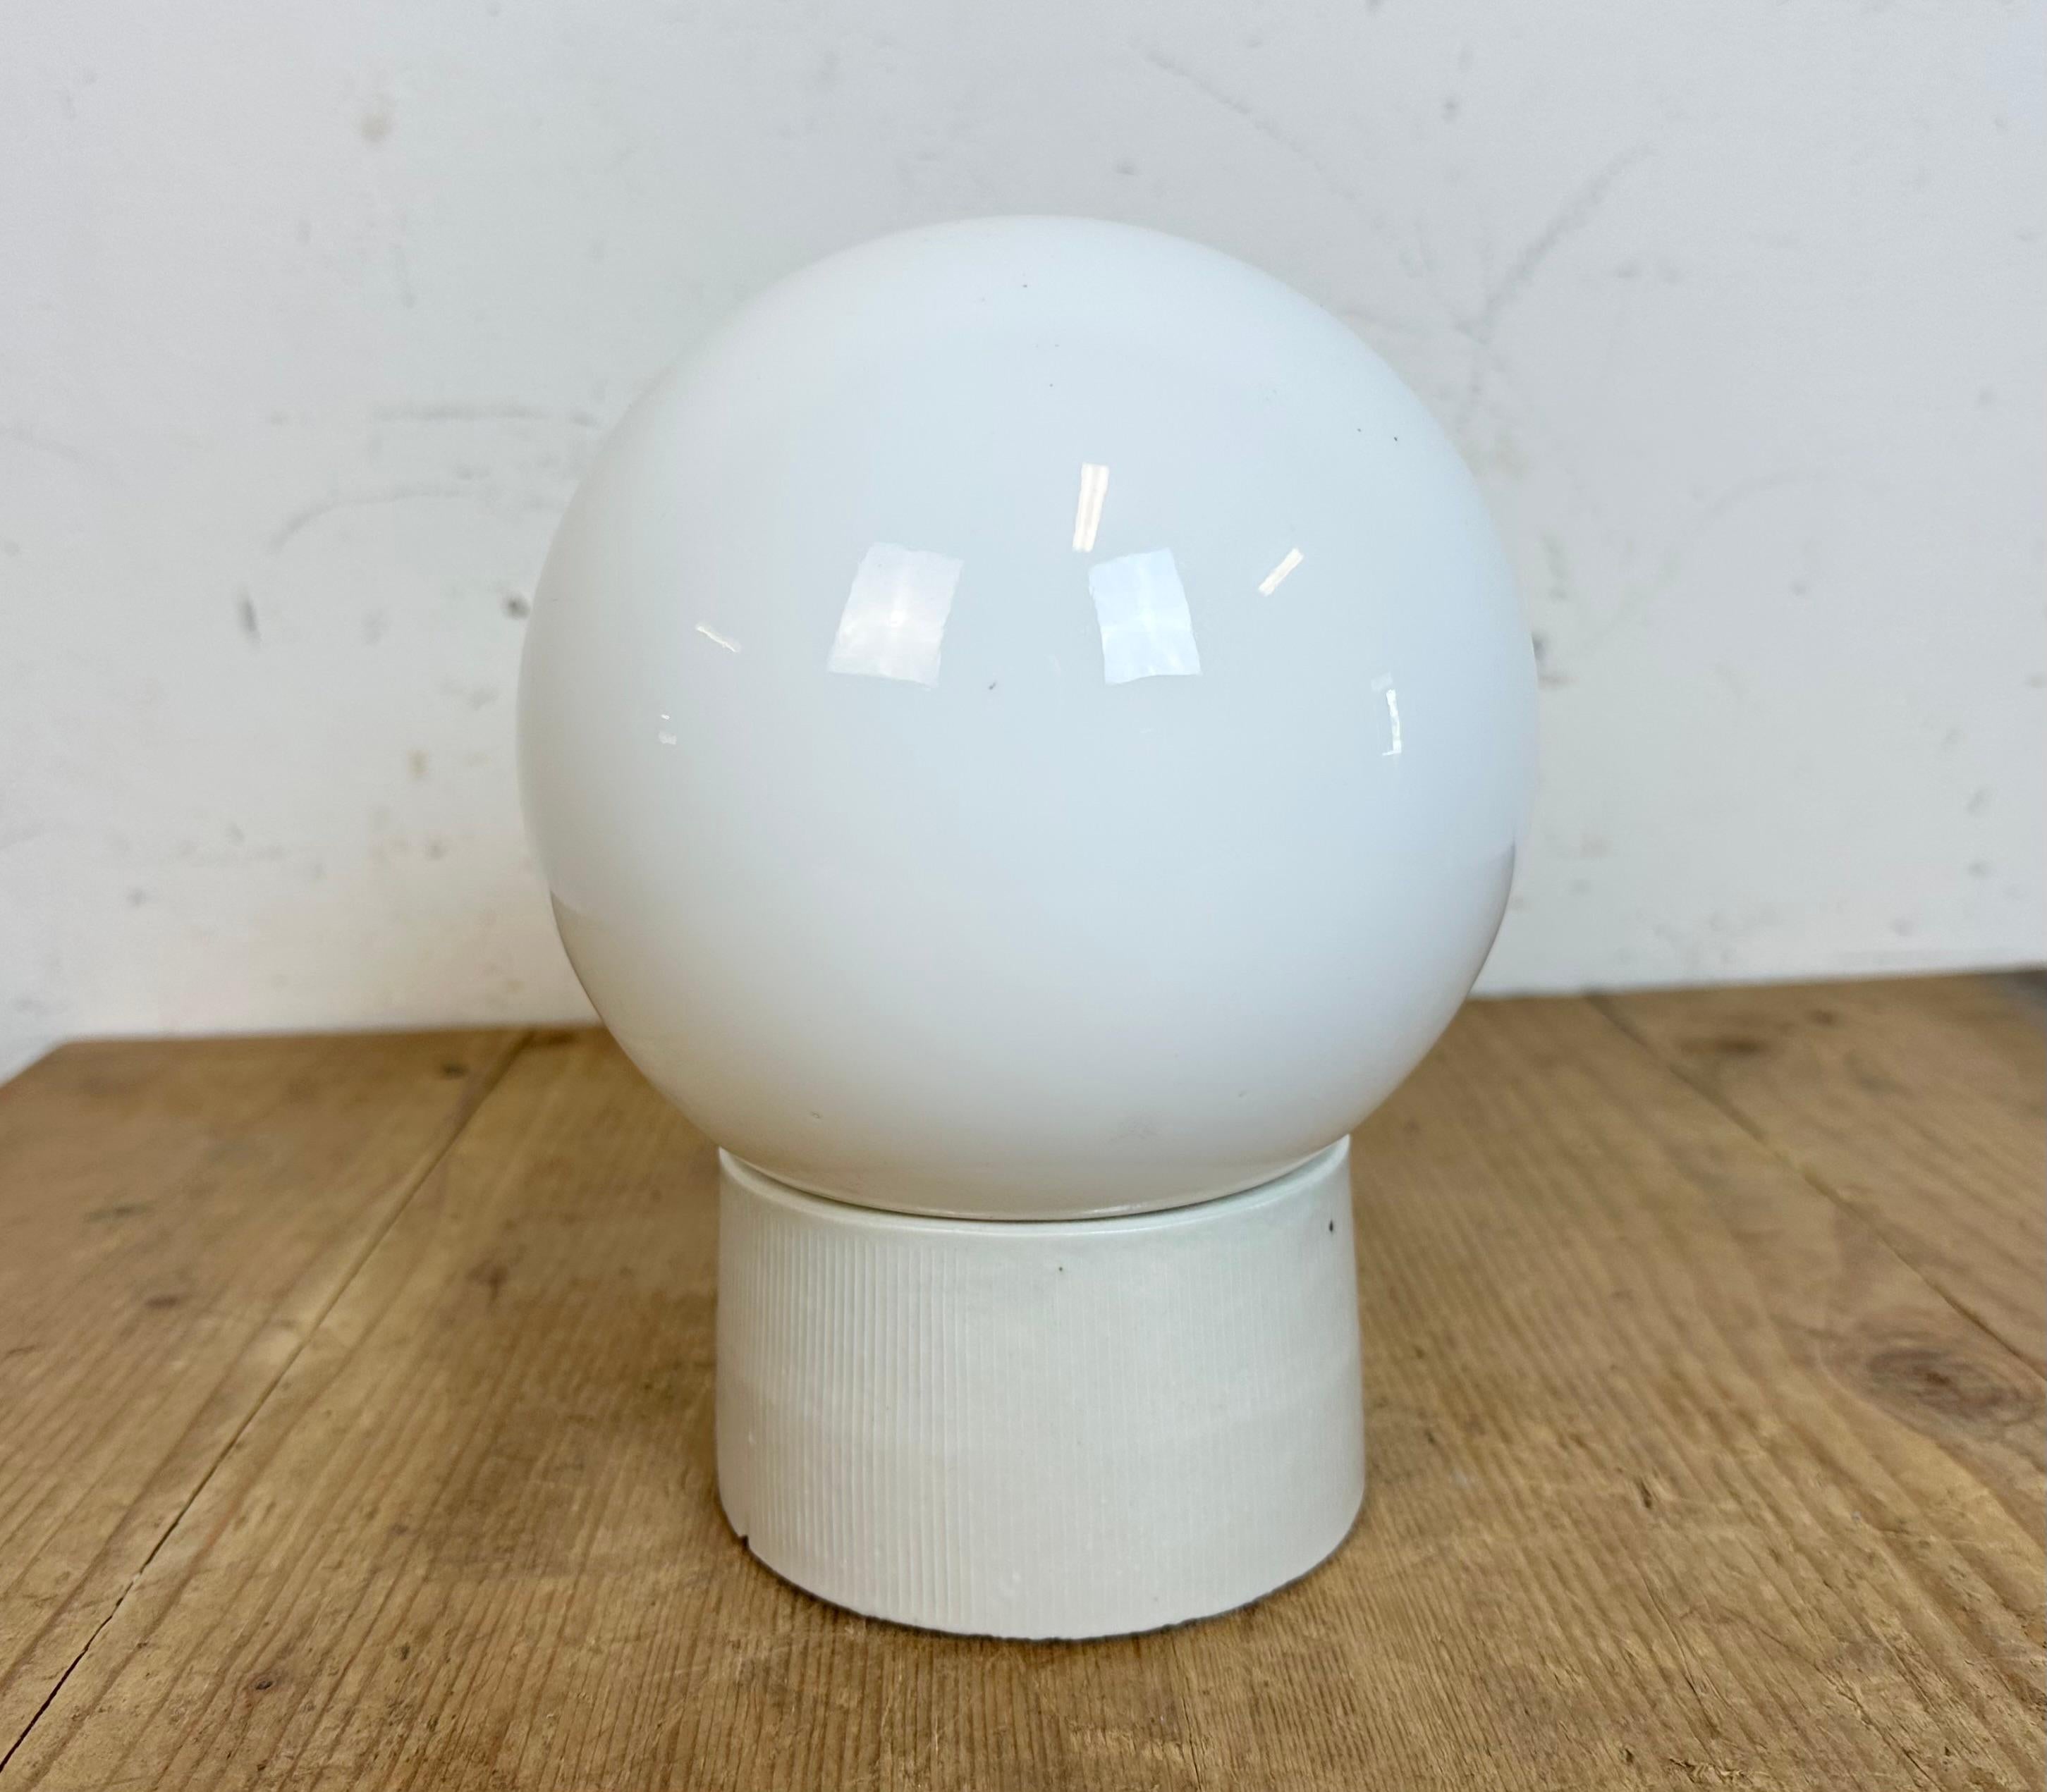 Vintage industrial ceiling or wall light  made in former Czechoslovakia during the 1960s. It features a white porcelain wall mounting and a milk glass cover. The socket requires E27/E 26 light bulbs. New wire. The weight of the lamp is 1